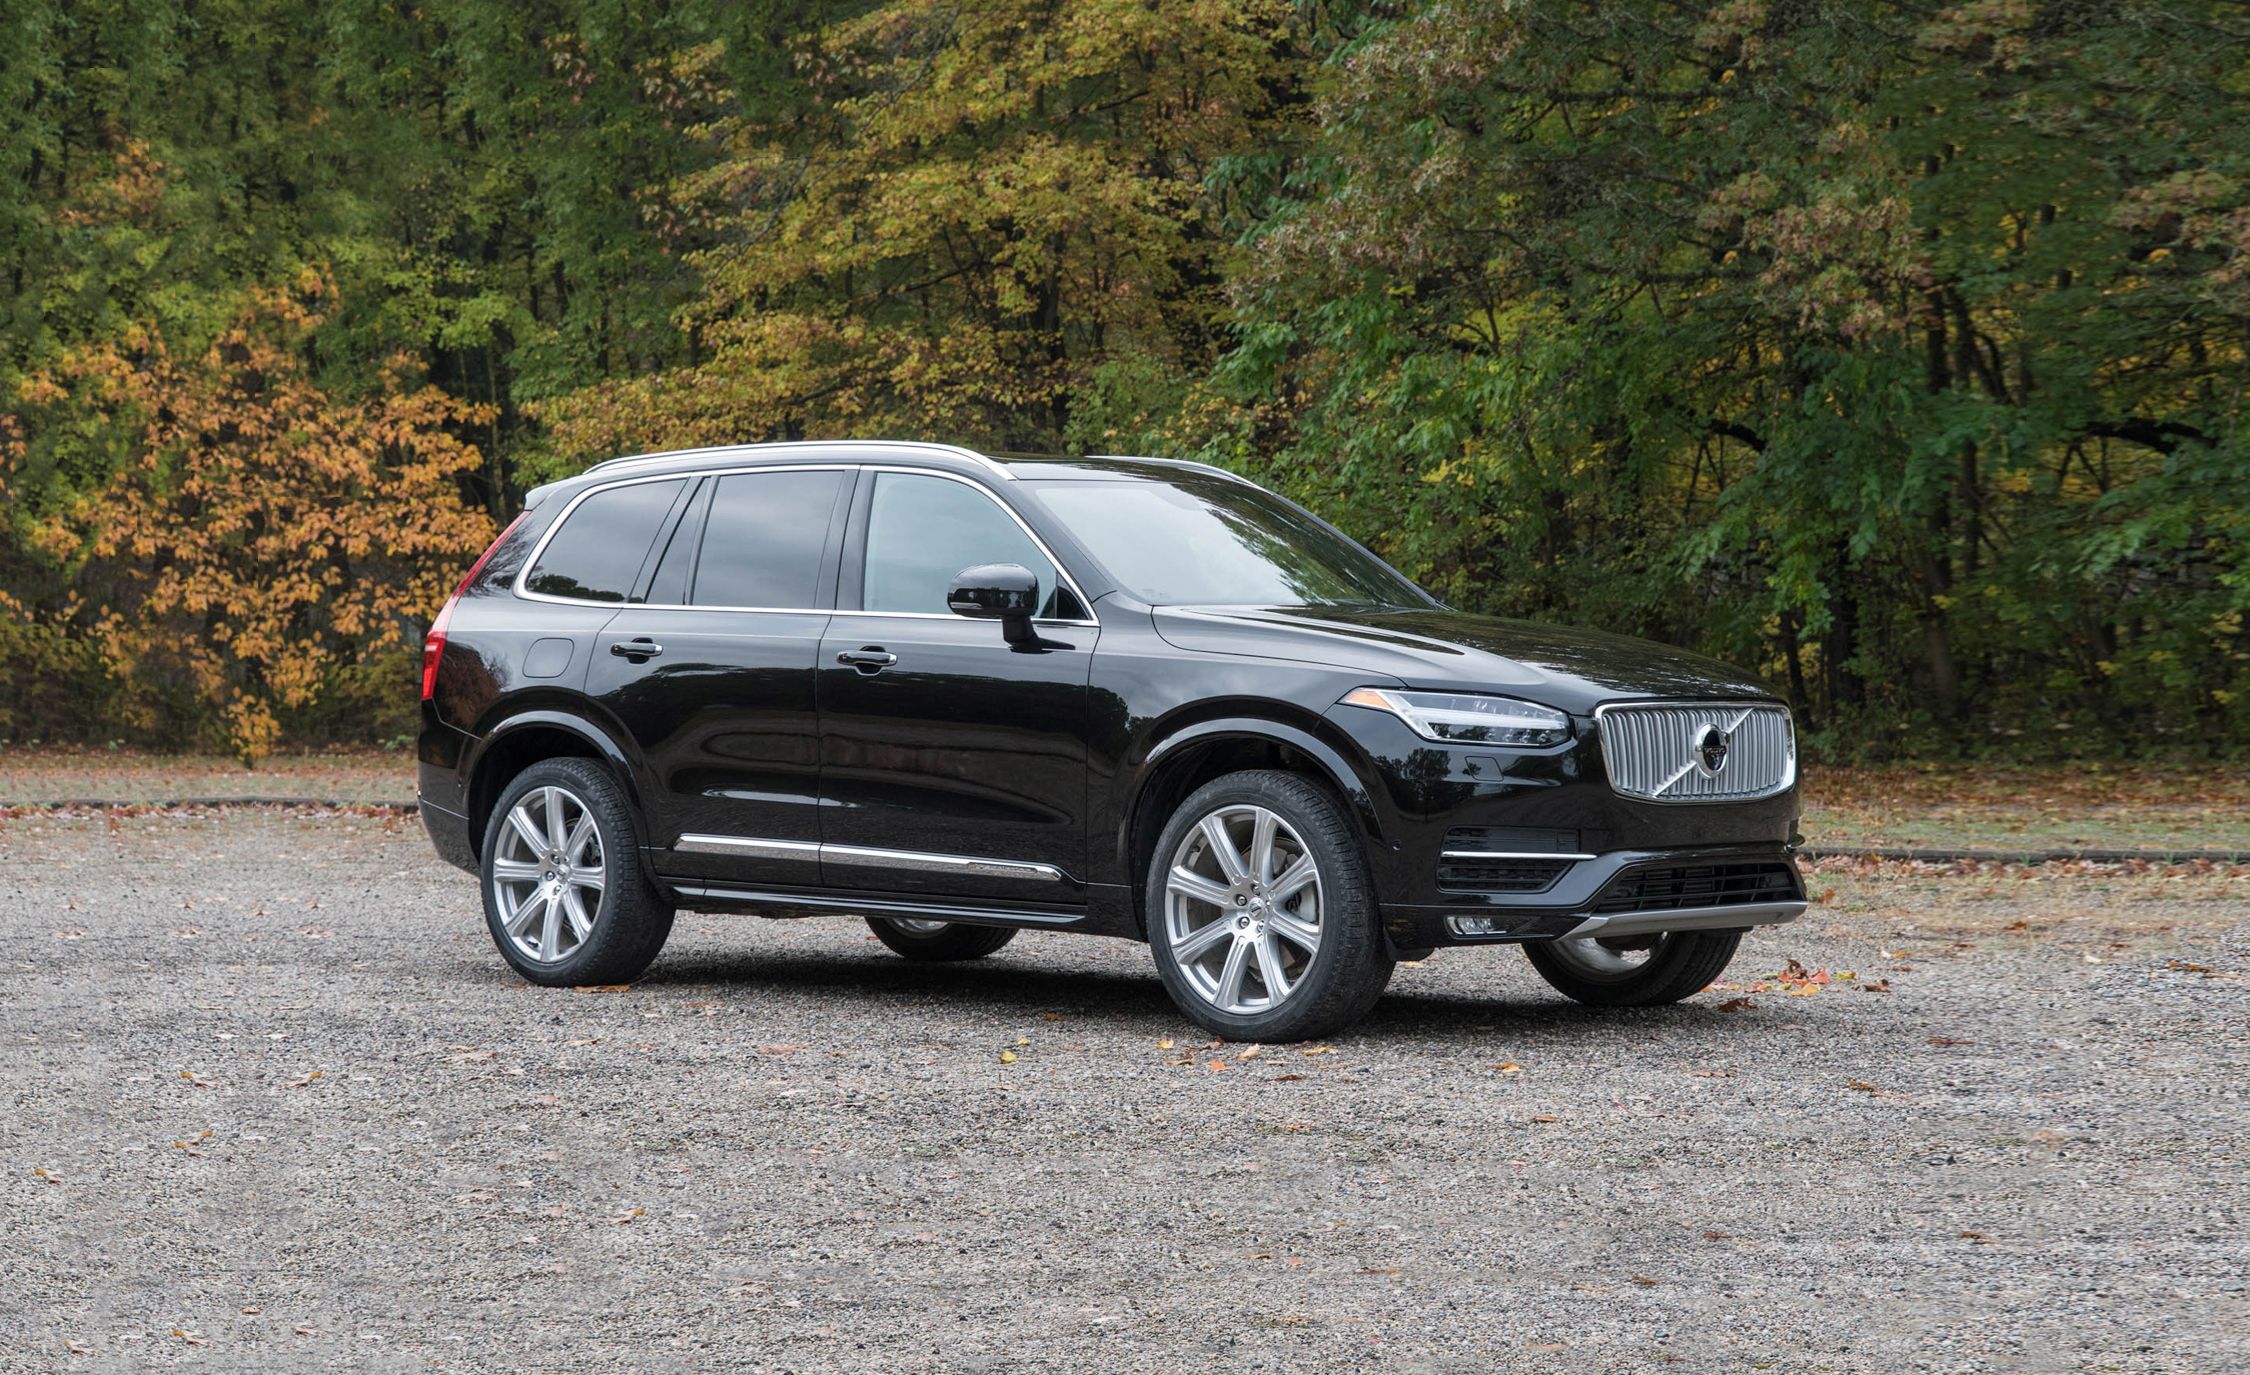 2020 Volvo XC90 Reviews | Volvo XC90 Price, Photos, and Specs | Car and Driver